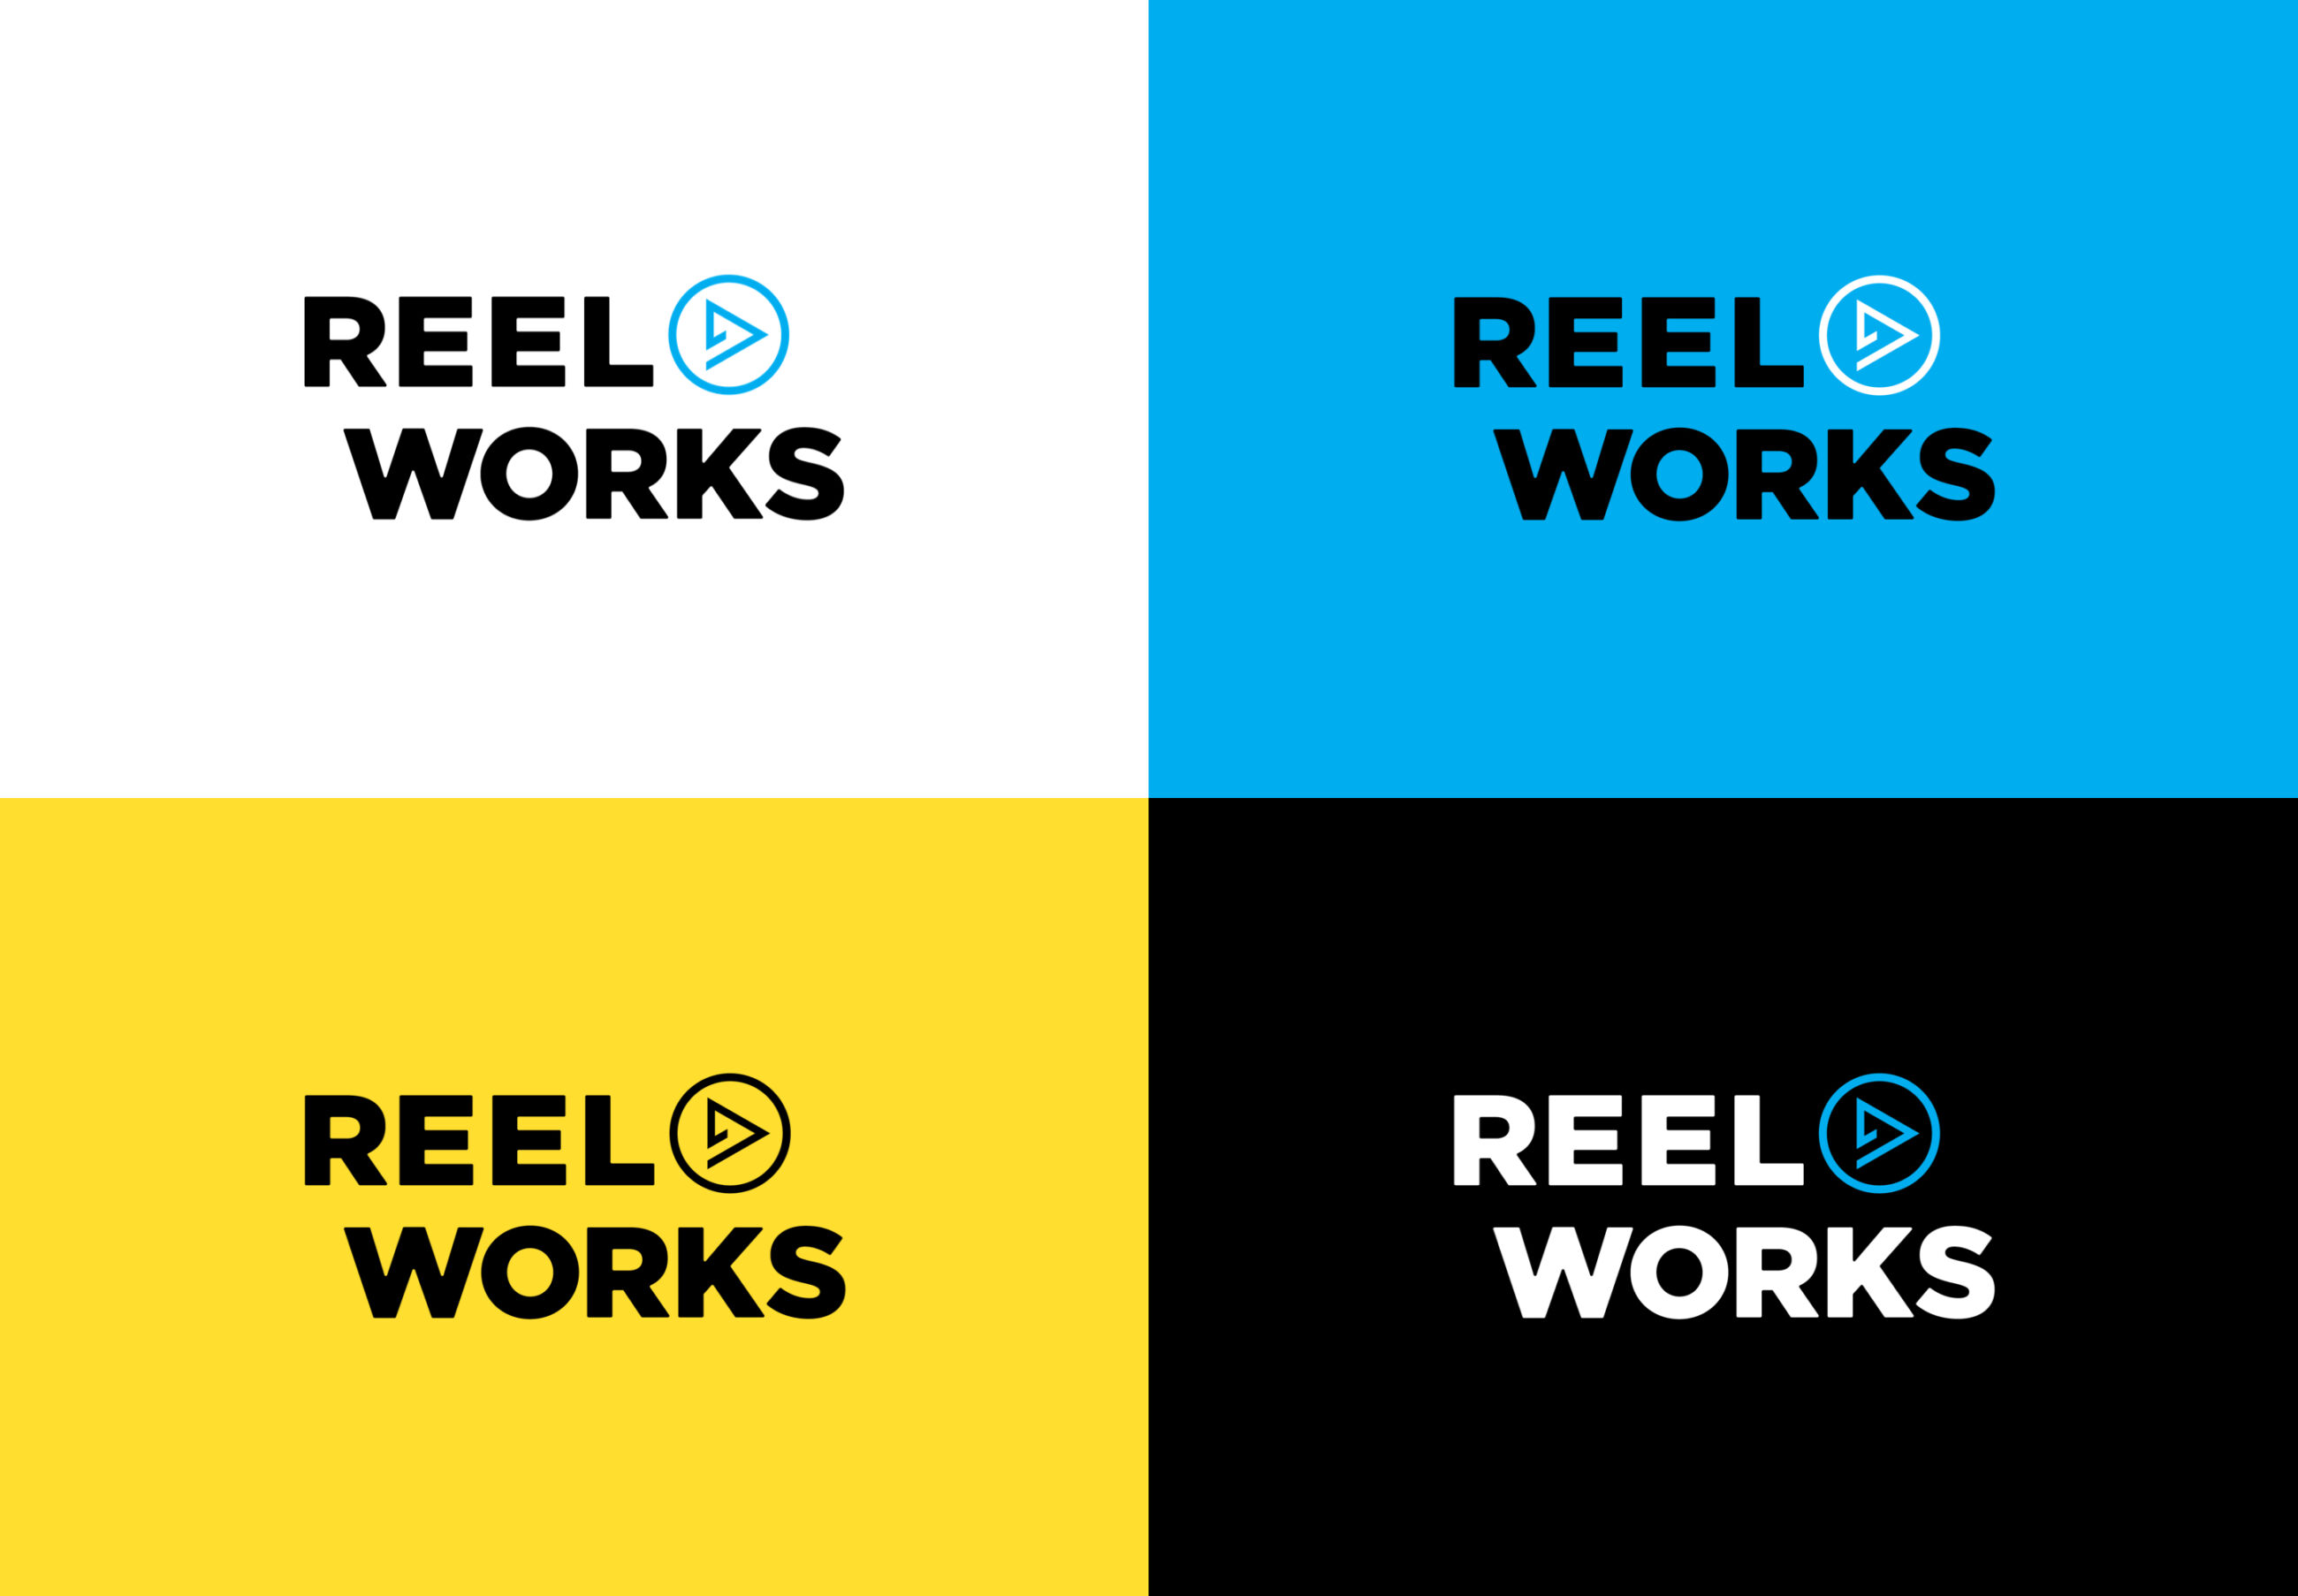 Reel Works logos shown on four different color backgrounds